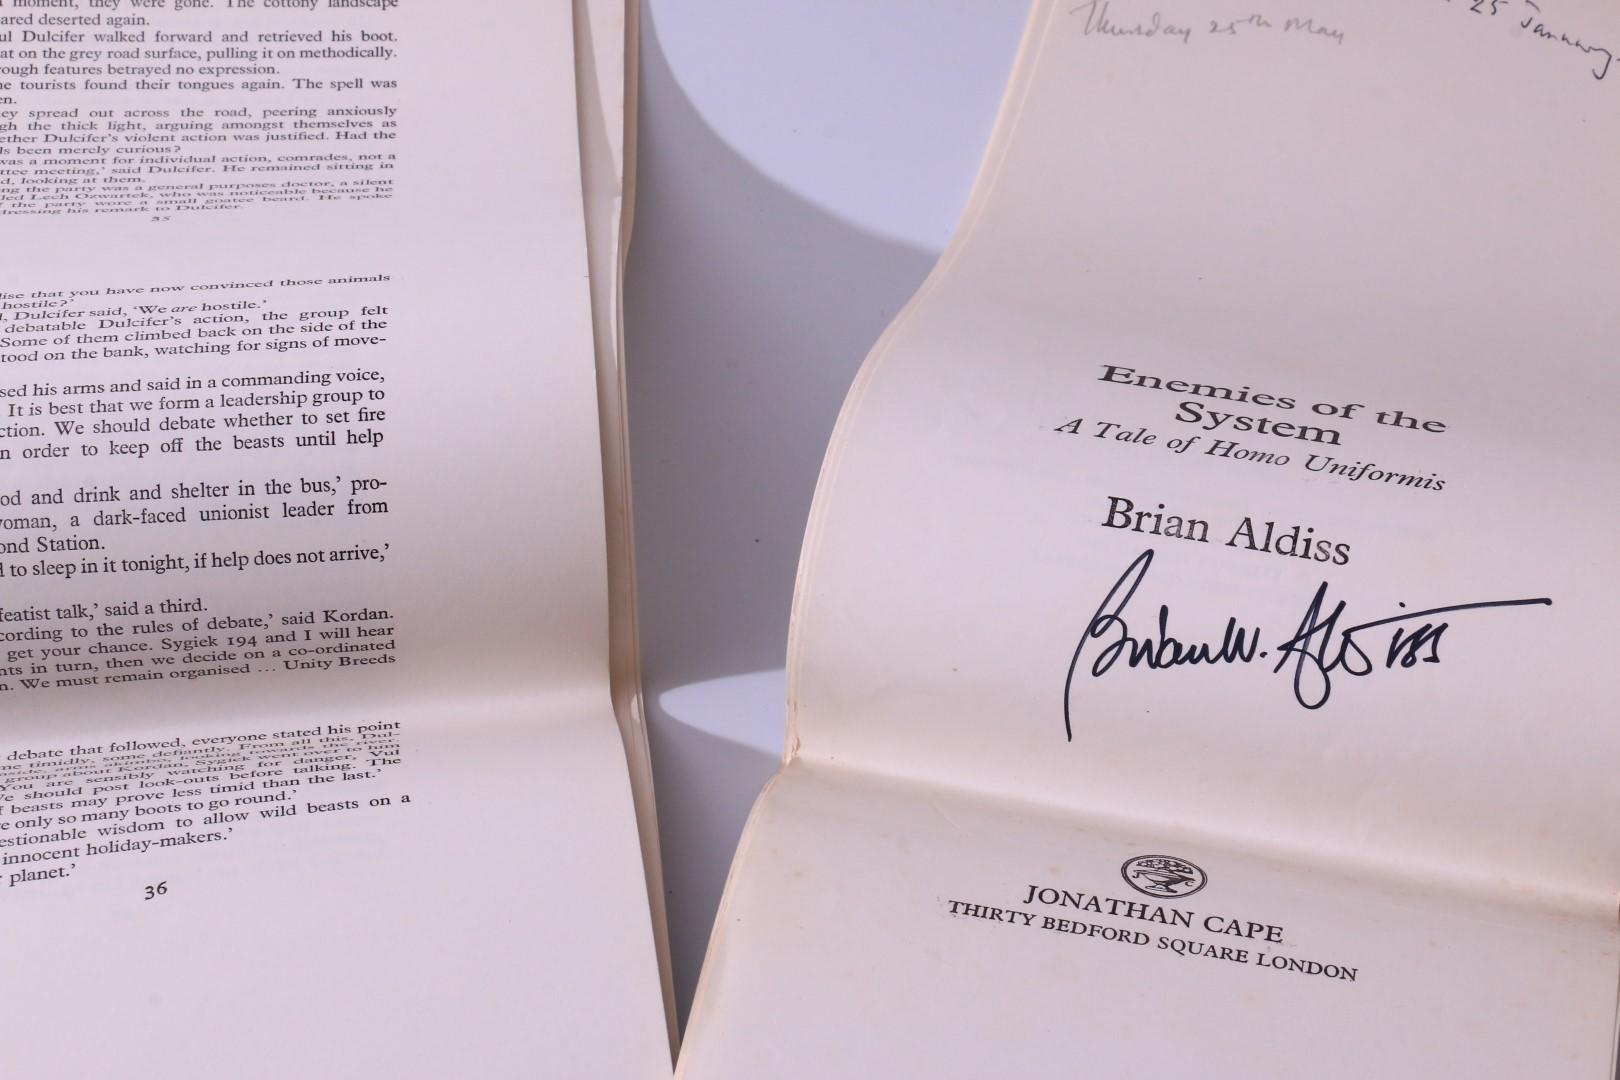 Brian Aldiss - Enemies of the System: A Tale of Homo Uniformis - Jonathan Cape, 1978, Proof. Signed